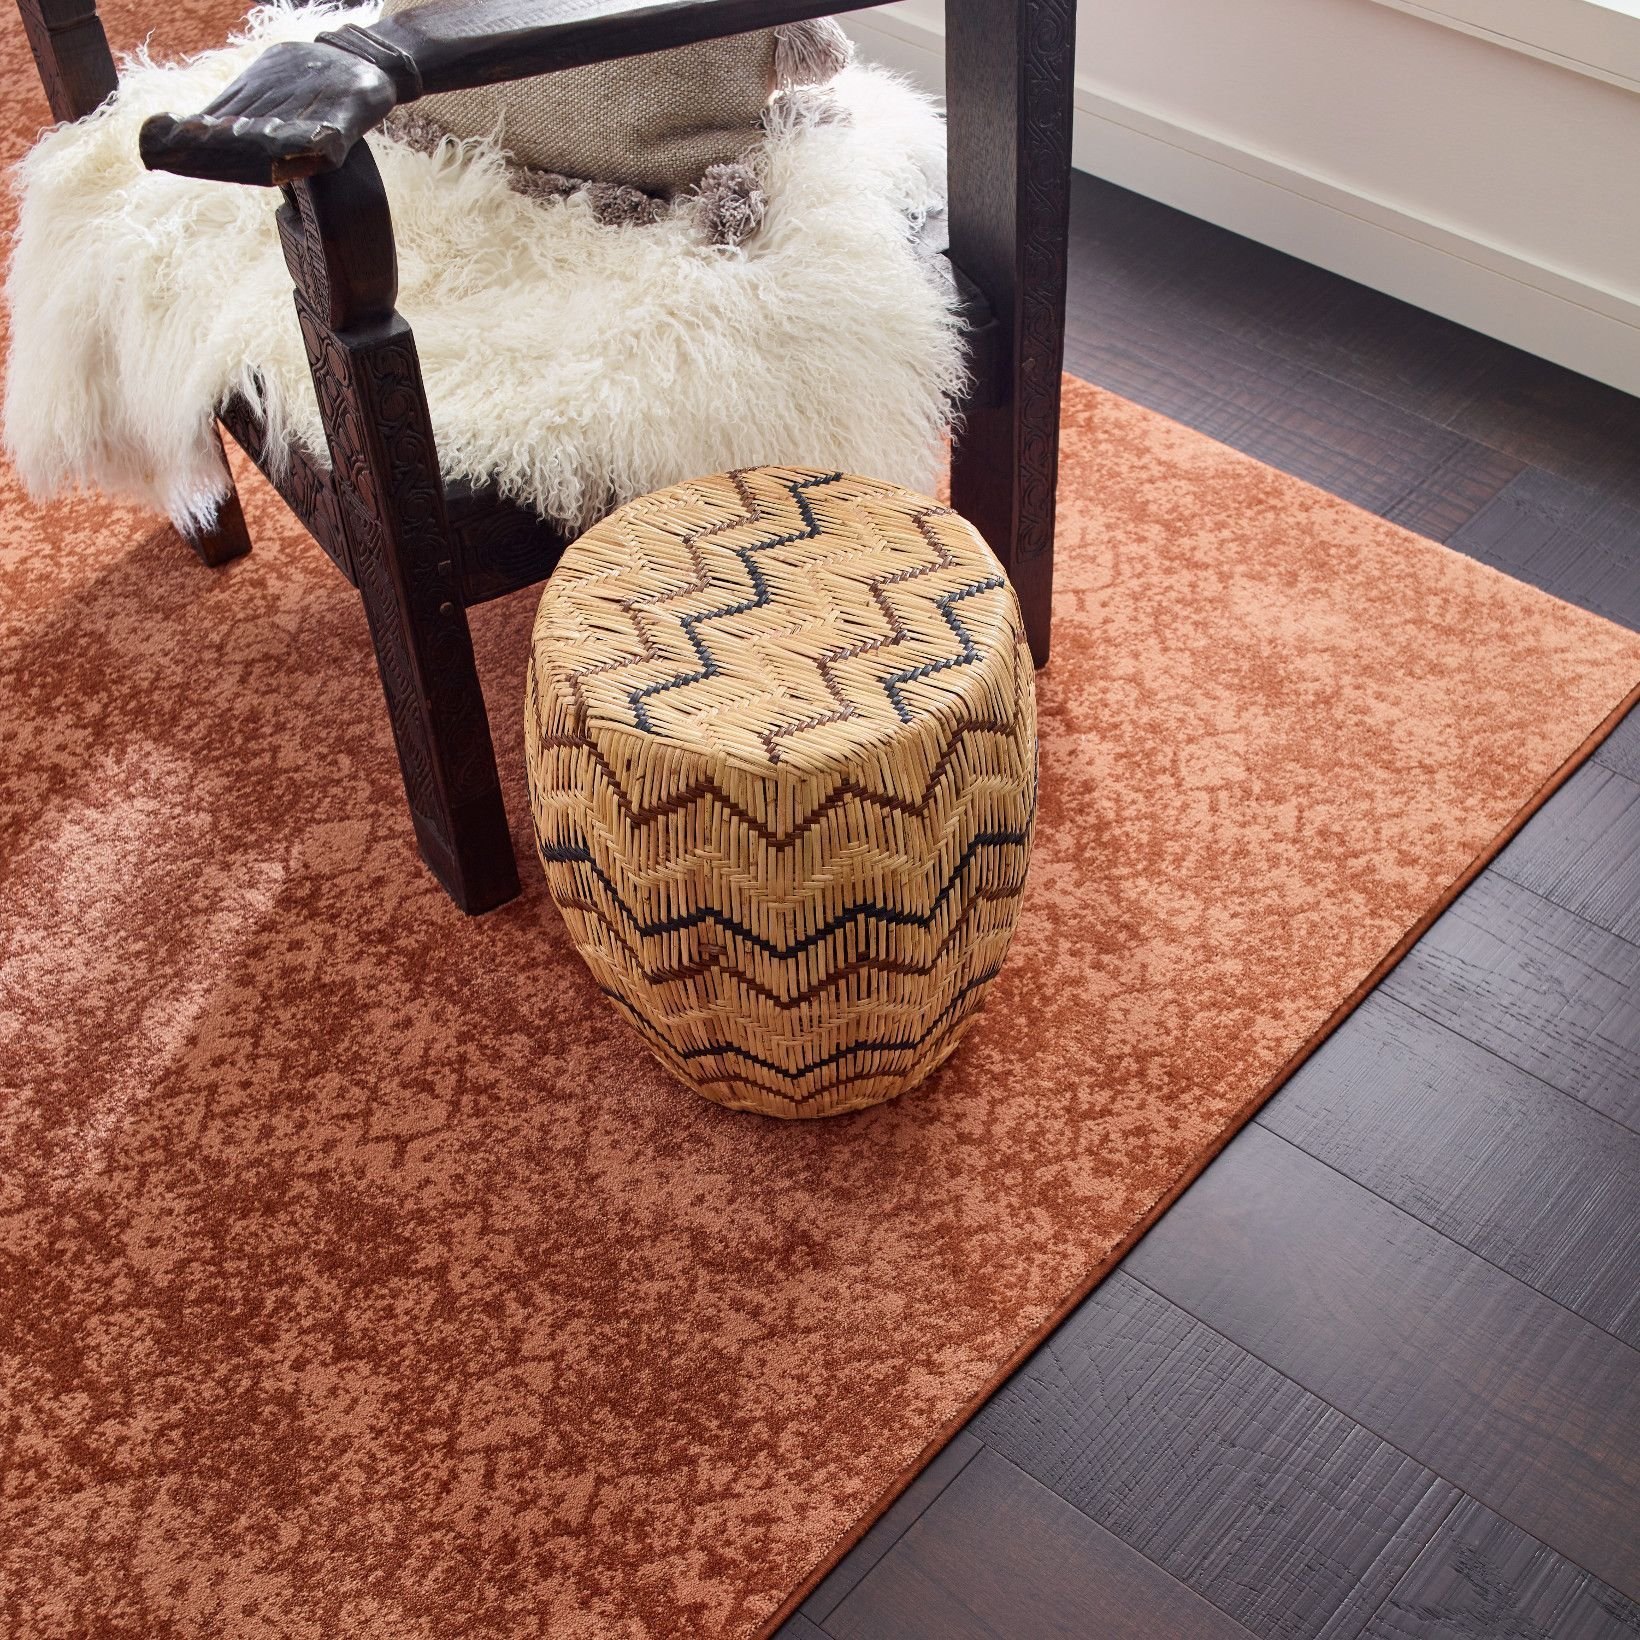 Wooden chair on an orange patterned rug in a room with dark hardwood flooring from Flooring Now in Manassas, VA